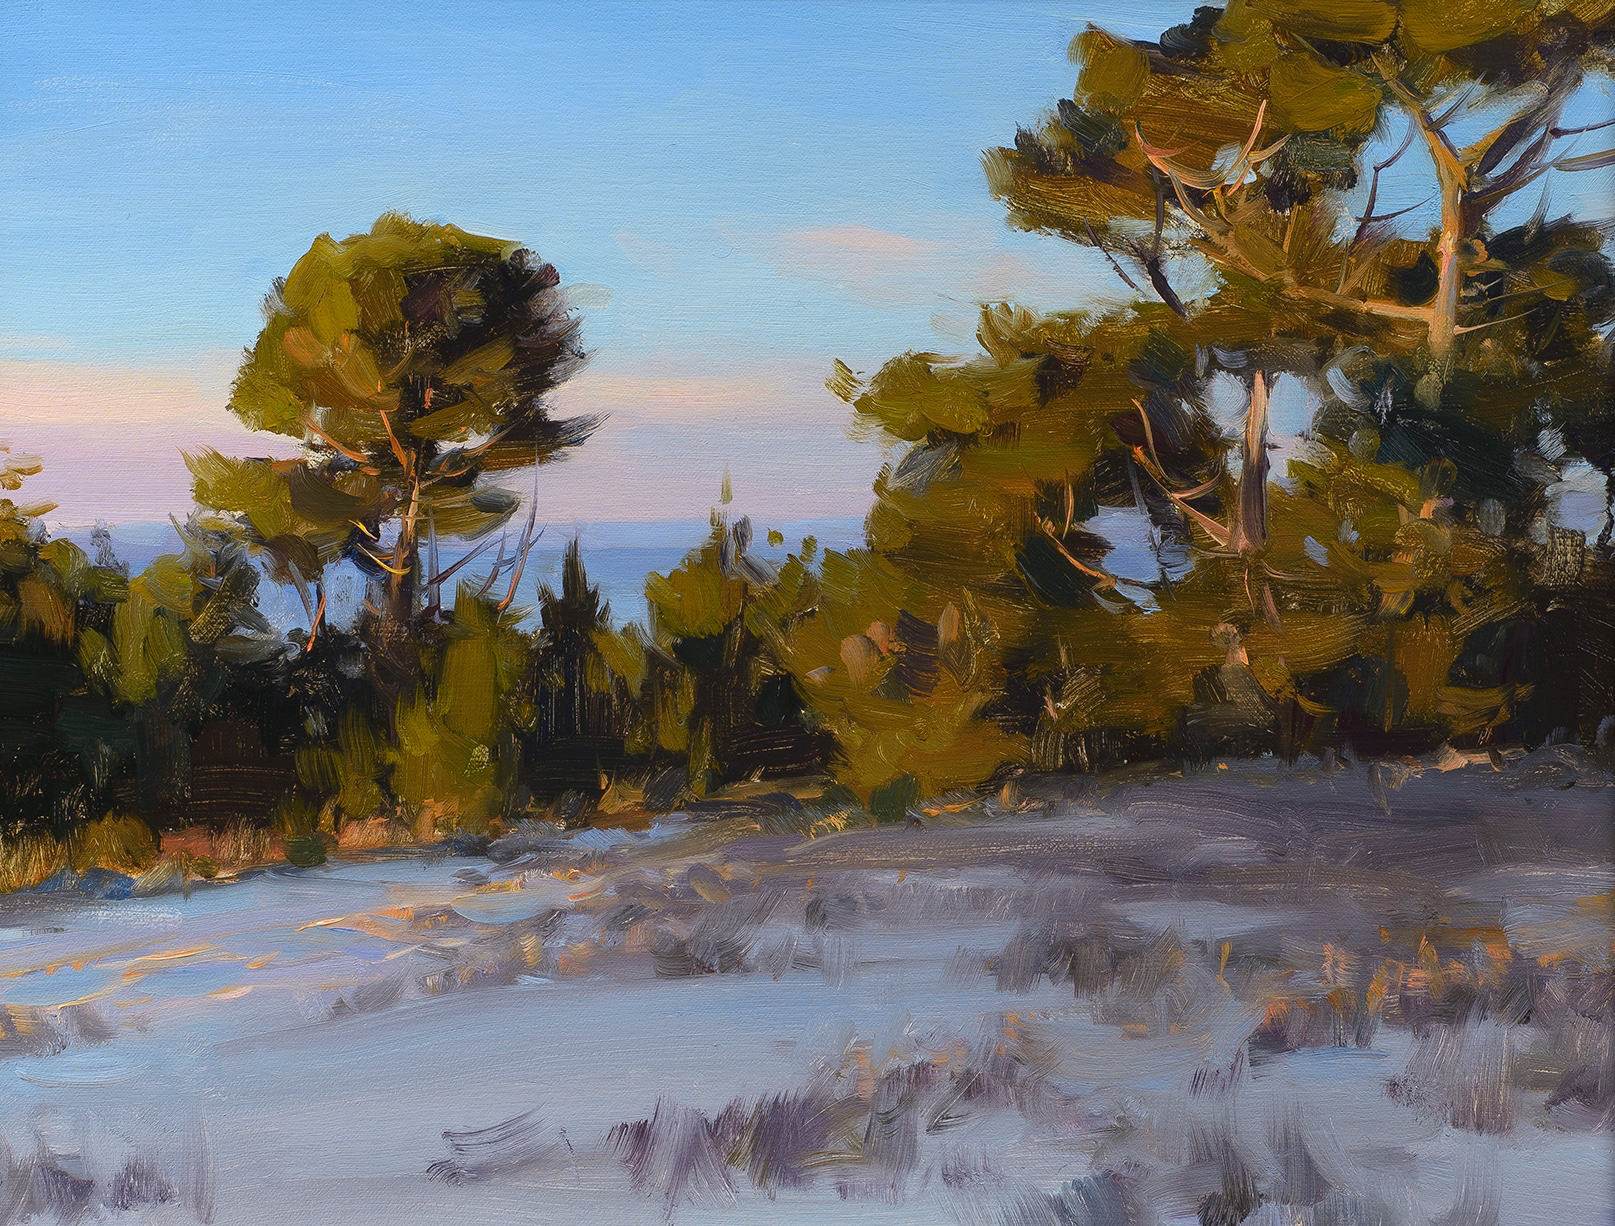  FANSHELL BEACH DUNES &nbsp; &nbsp; &nbsp; &nbsp; &nbsp; &nbsp; 14X18 inches, oil on linen  